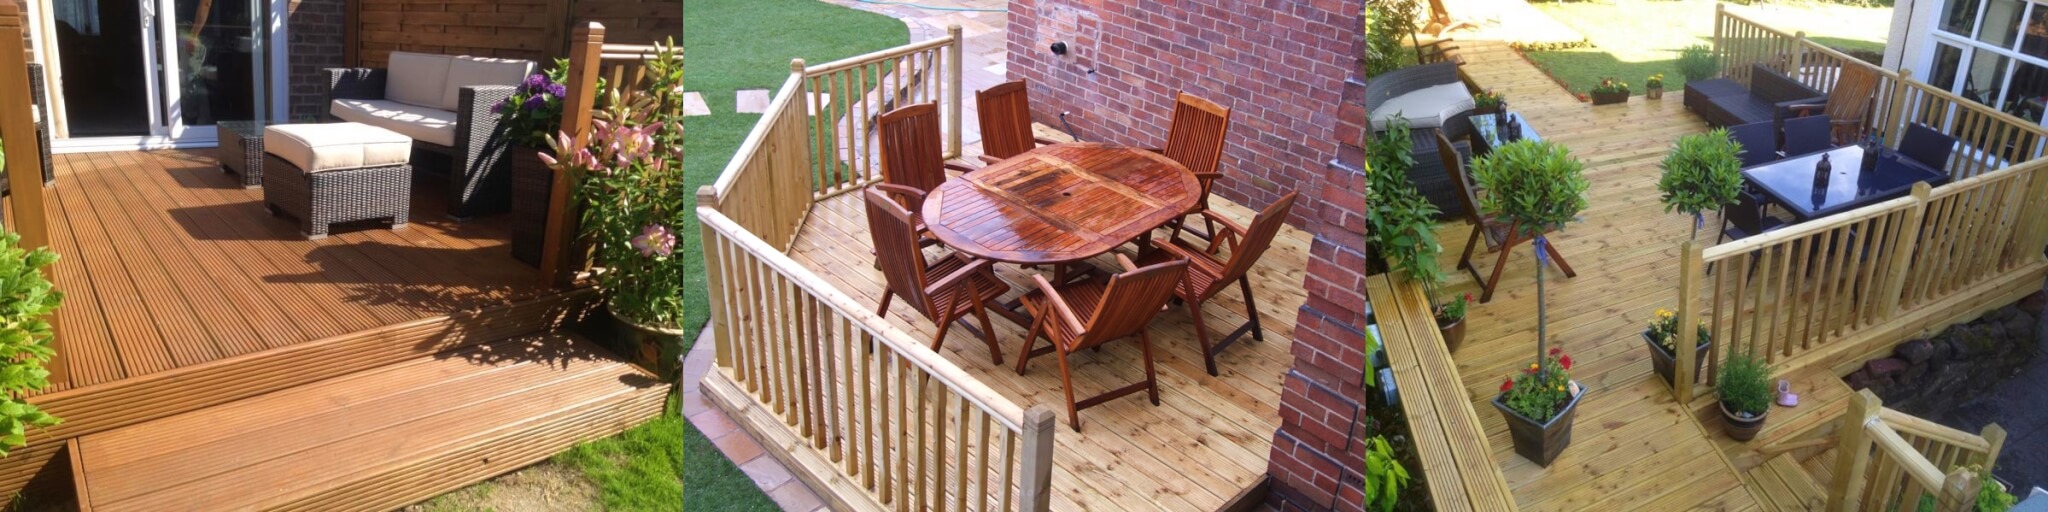 Timber Decking Installers Cheshire